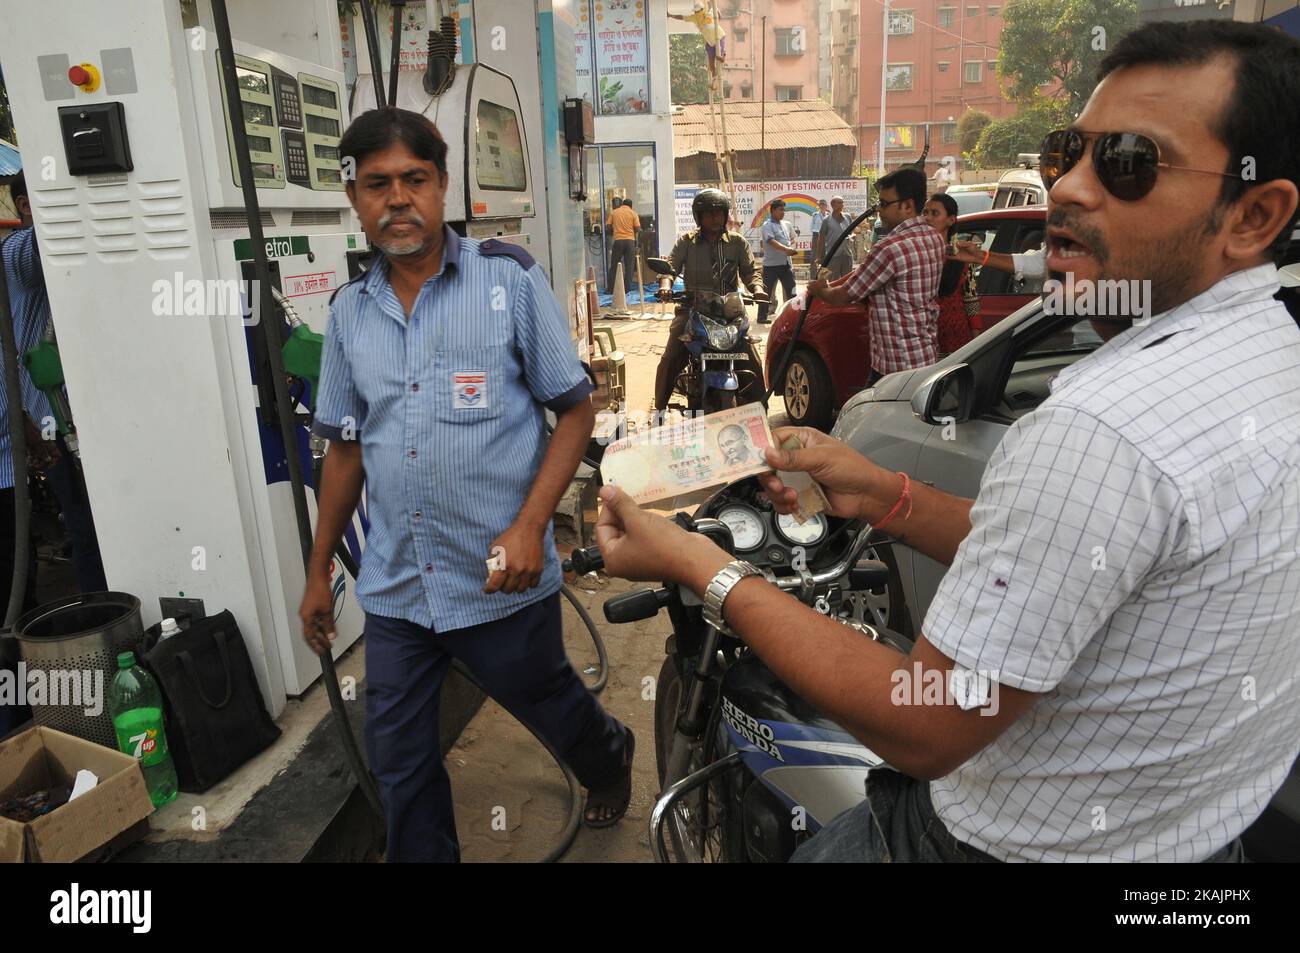 Indian Customer Showing RS 1000, HP PETROL PUMP dealers  not to accept Rs. 500 and 1000 Indian currency, A close-up view of a 1000 Rupee note after India's Prime Minister Narendra Modi announced the discontinuation of 500 and 1000 Rupee currency notes as legal tender as of  yesterday midnight in a bid to curb corruption, black money and fake currency, on November 9, 2016 in Kolkata, India. India will soon be introducing new notes of 2000 and 500 Rupee denominations that will be Braille compliant.  (Photo by Debajyoti Chakraborty/NurPhoto) *** Please Use Credit from Credit Field *** Stock Photo